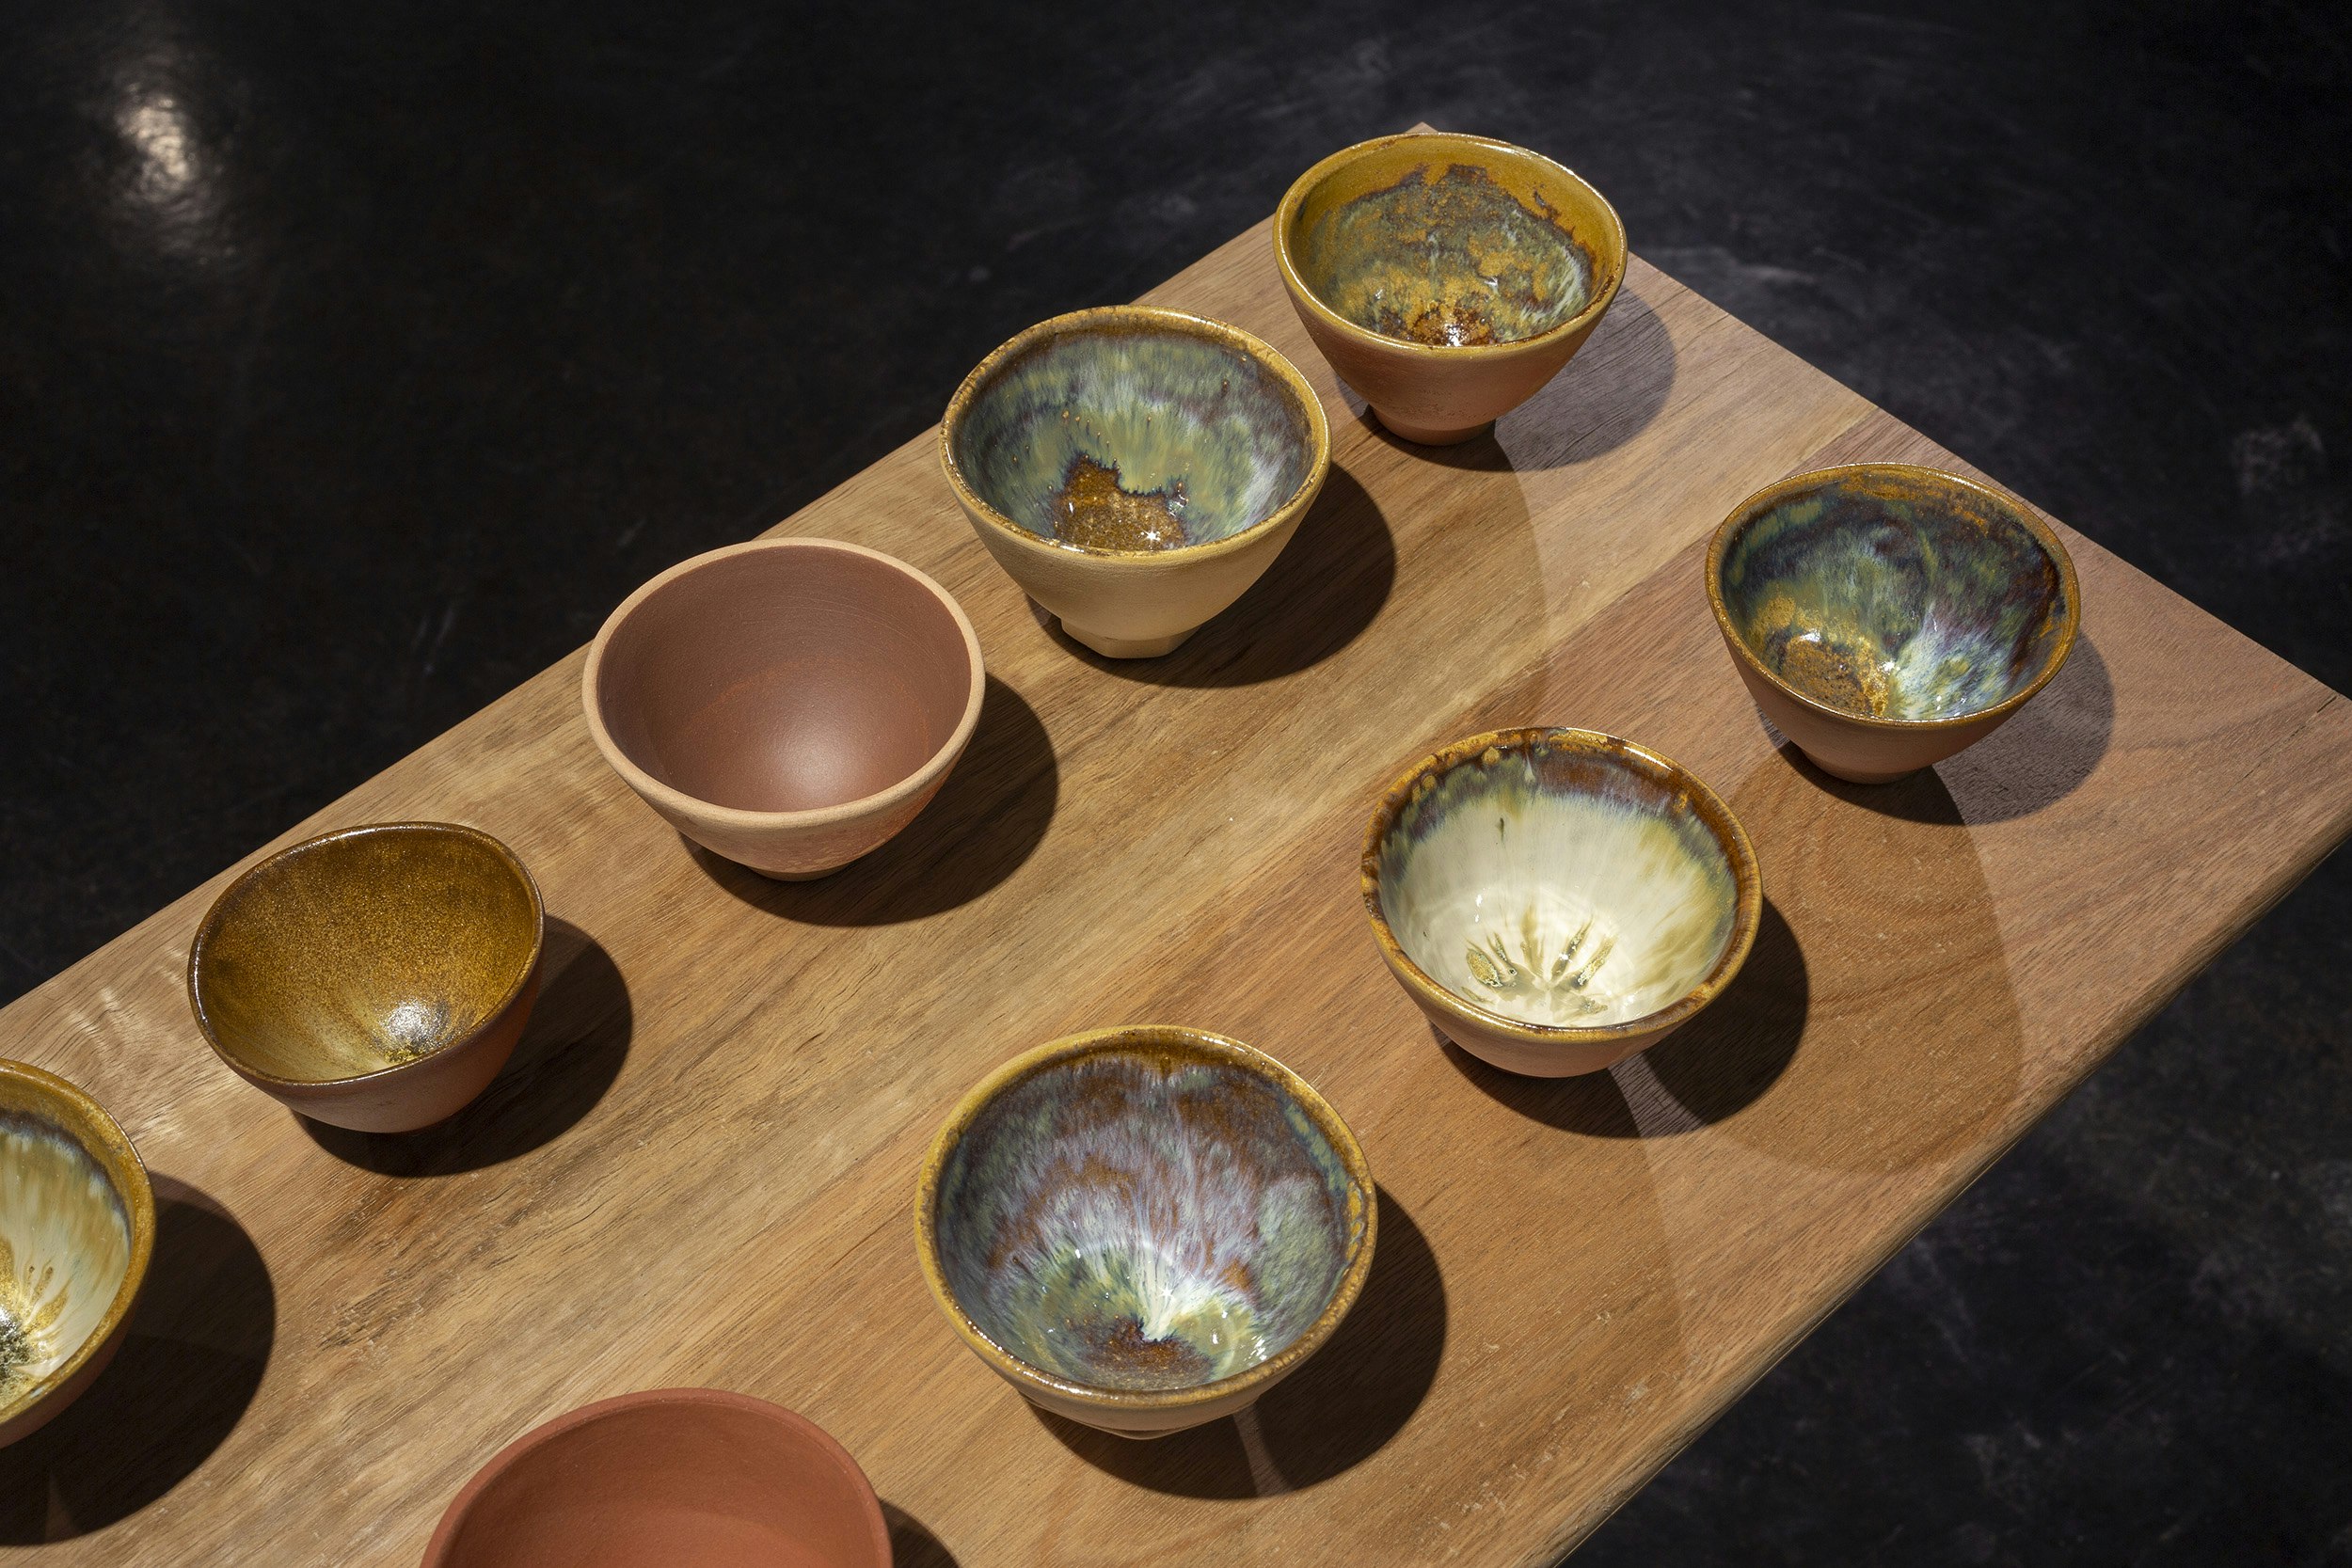 Image: Ray Chan See Kwong, NEW RE NEW (detail), 2018, 49 teacups: various local Chuen Lung clays, glazed and fired; produced as part of the 2018 public art and community project Hi! Hill!, by the Hong Kong Leisure and Cultural Services Department, Organised by the Art Promotion Office with Curatorial Partner (art in-situ): Make A Difference Institute, Hong Kong; courtesy the artist; Mounted on River bench, recycled spotted gum bench and assorted hardwood legs, wax, by Bryden Williams of Mount Framing, commissioned by 4A Centre for Contemporary Asian Art, 2021; photo: Christian Capurro for Drawn by stones, presented by 4A Centre for Contemporary Asian Art at Counihan Gallery, Brunswick, 2021